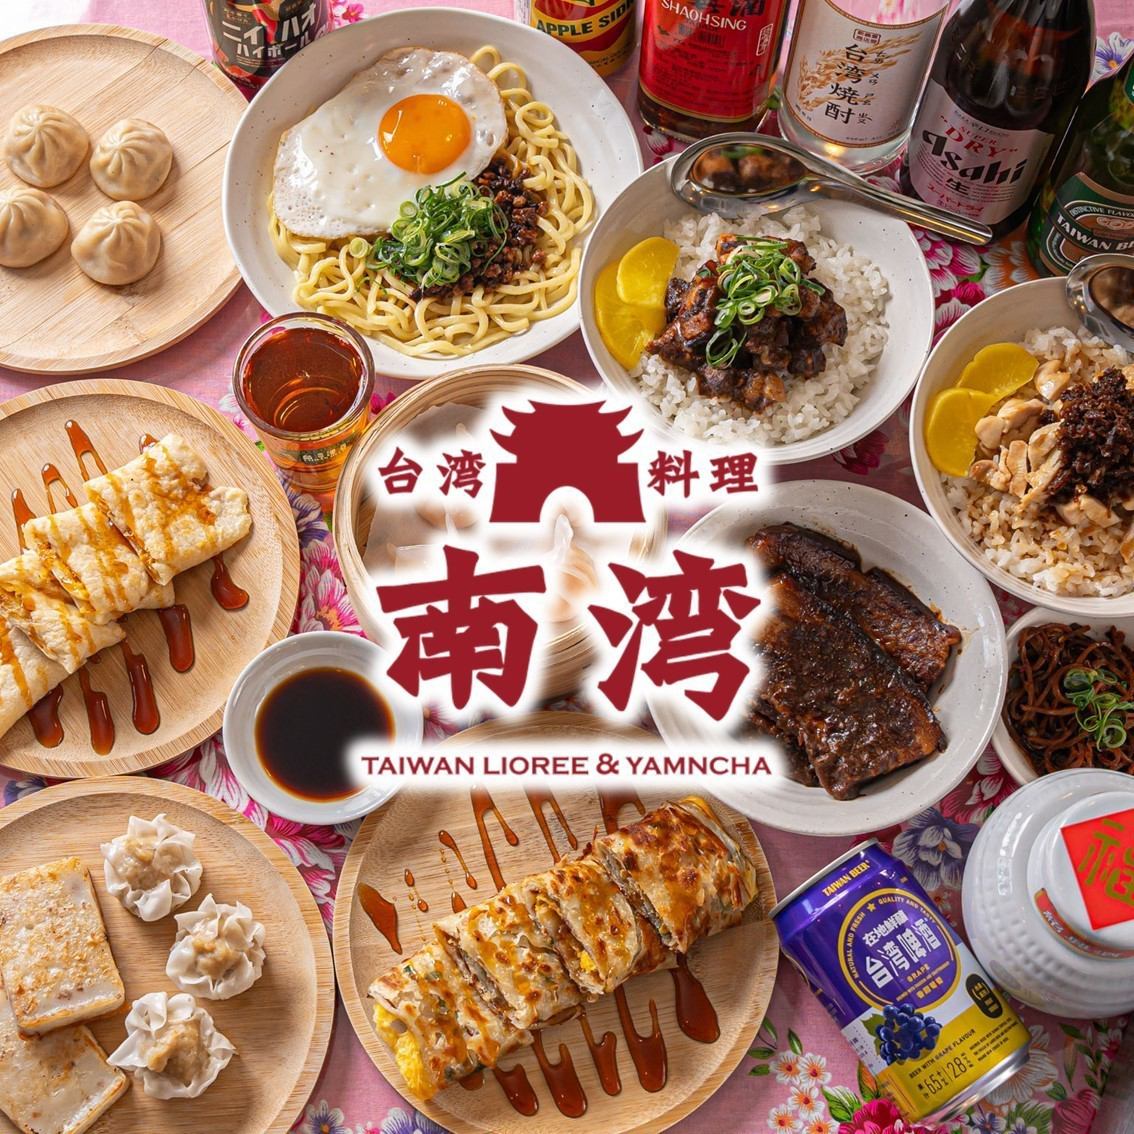 Enjoy authentic street food with Taiwanese alcohol in a space where you can enjoy the feeling of traveling.